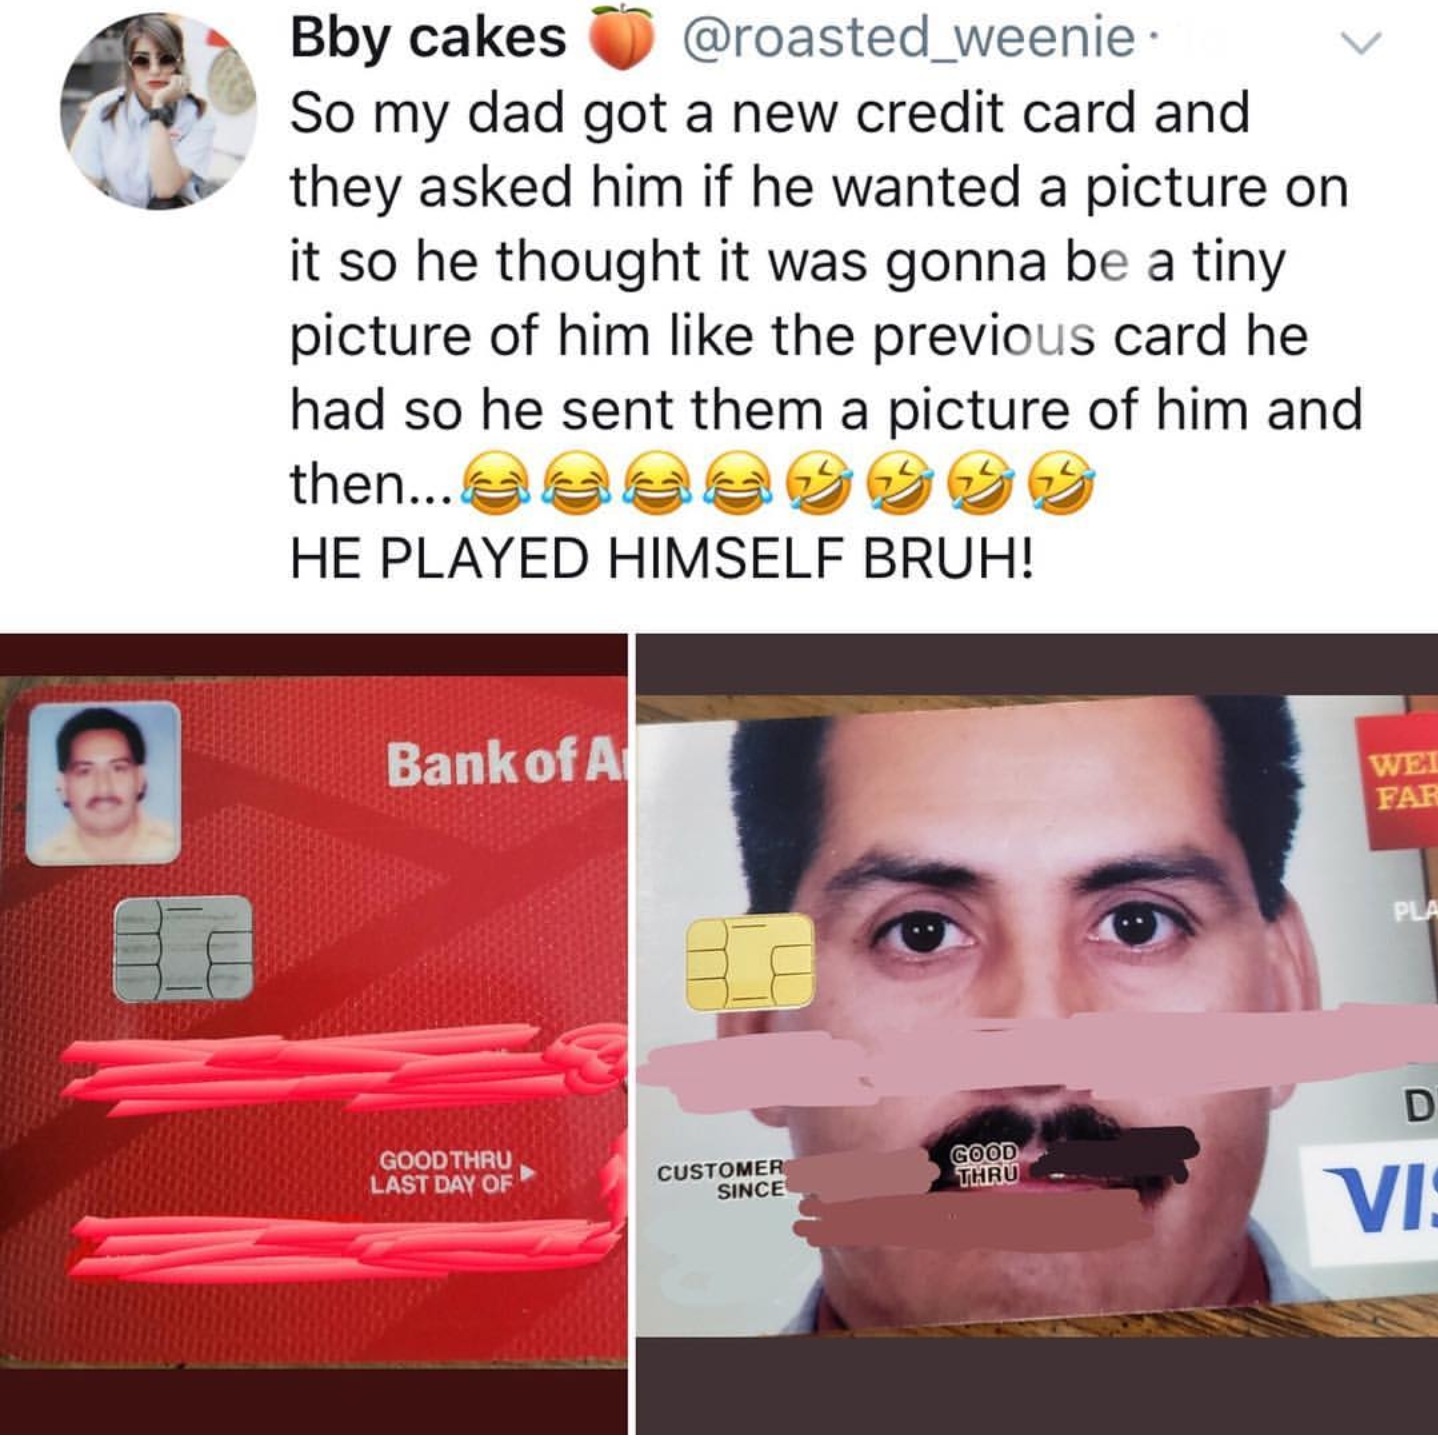 memes - credit card dad - Bby cakes So my dad got a new credit card and they asked him if he wanted a picture on it so he thought it was gonna be a tiny picture of him the previous card he had so he sent them a picture of him and then... He Played Himself